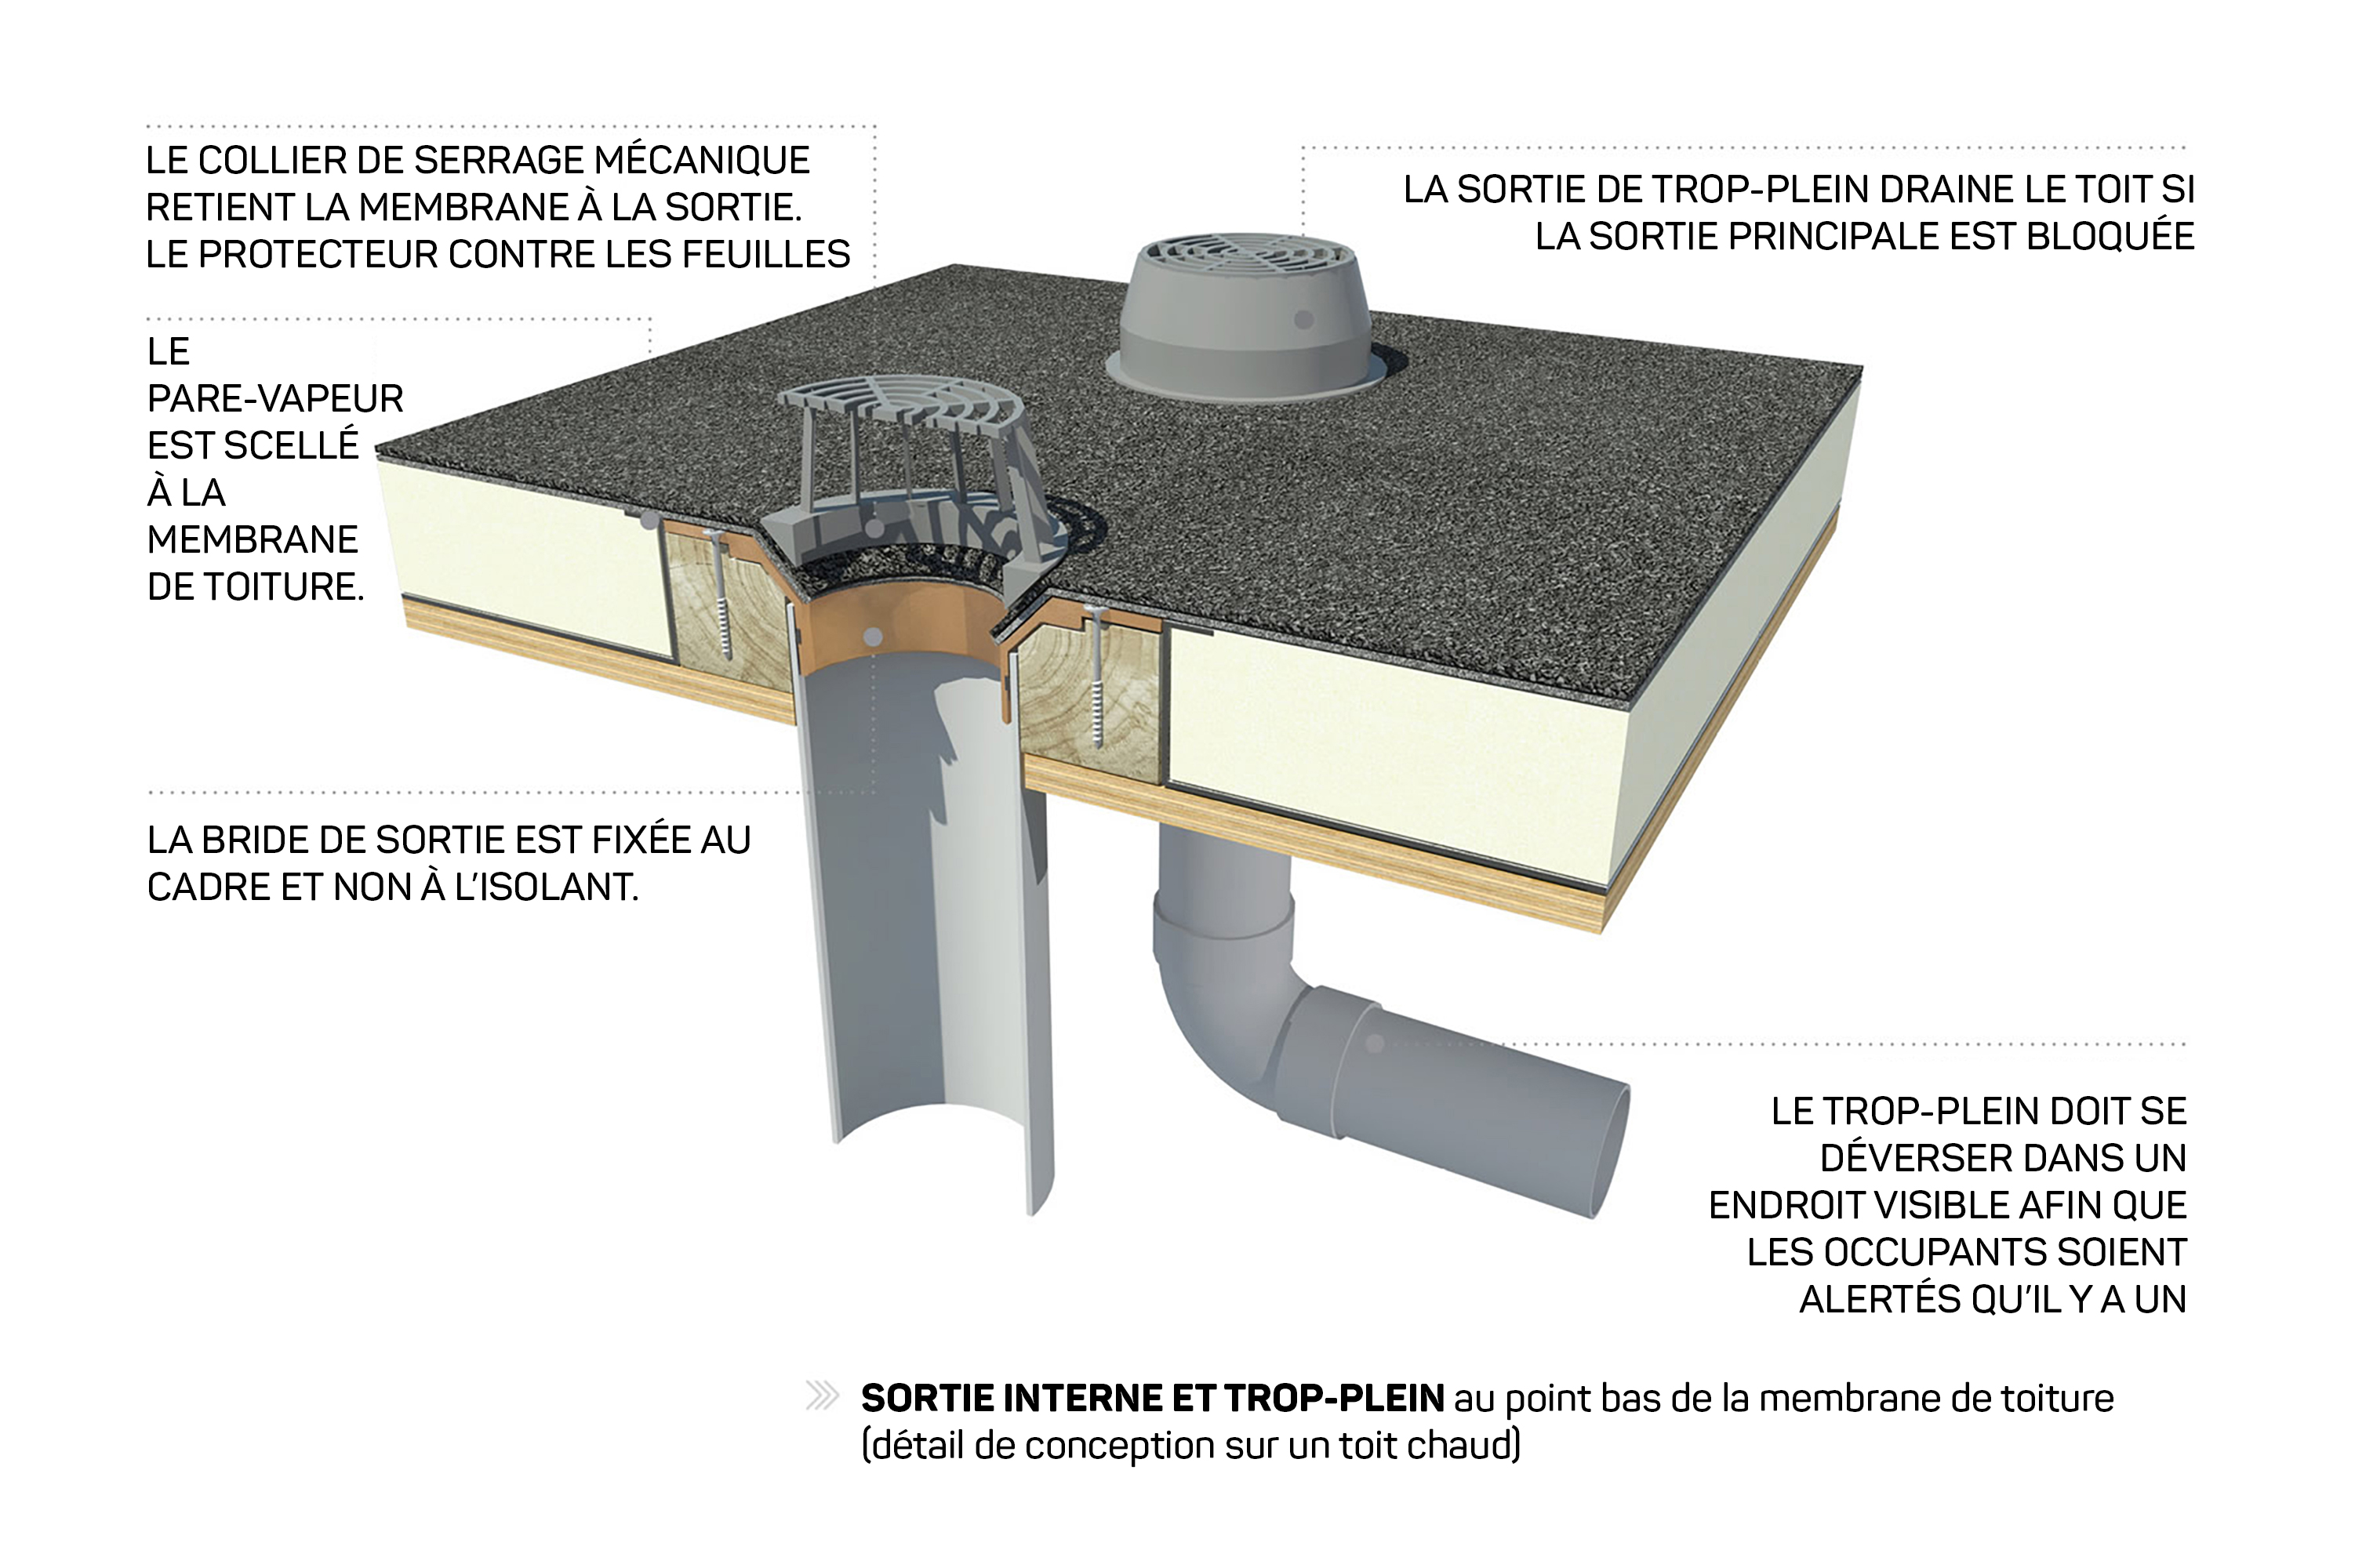 Parts of the Commercial flat roof Drainage System